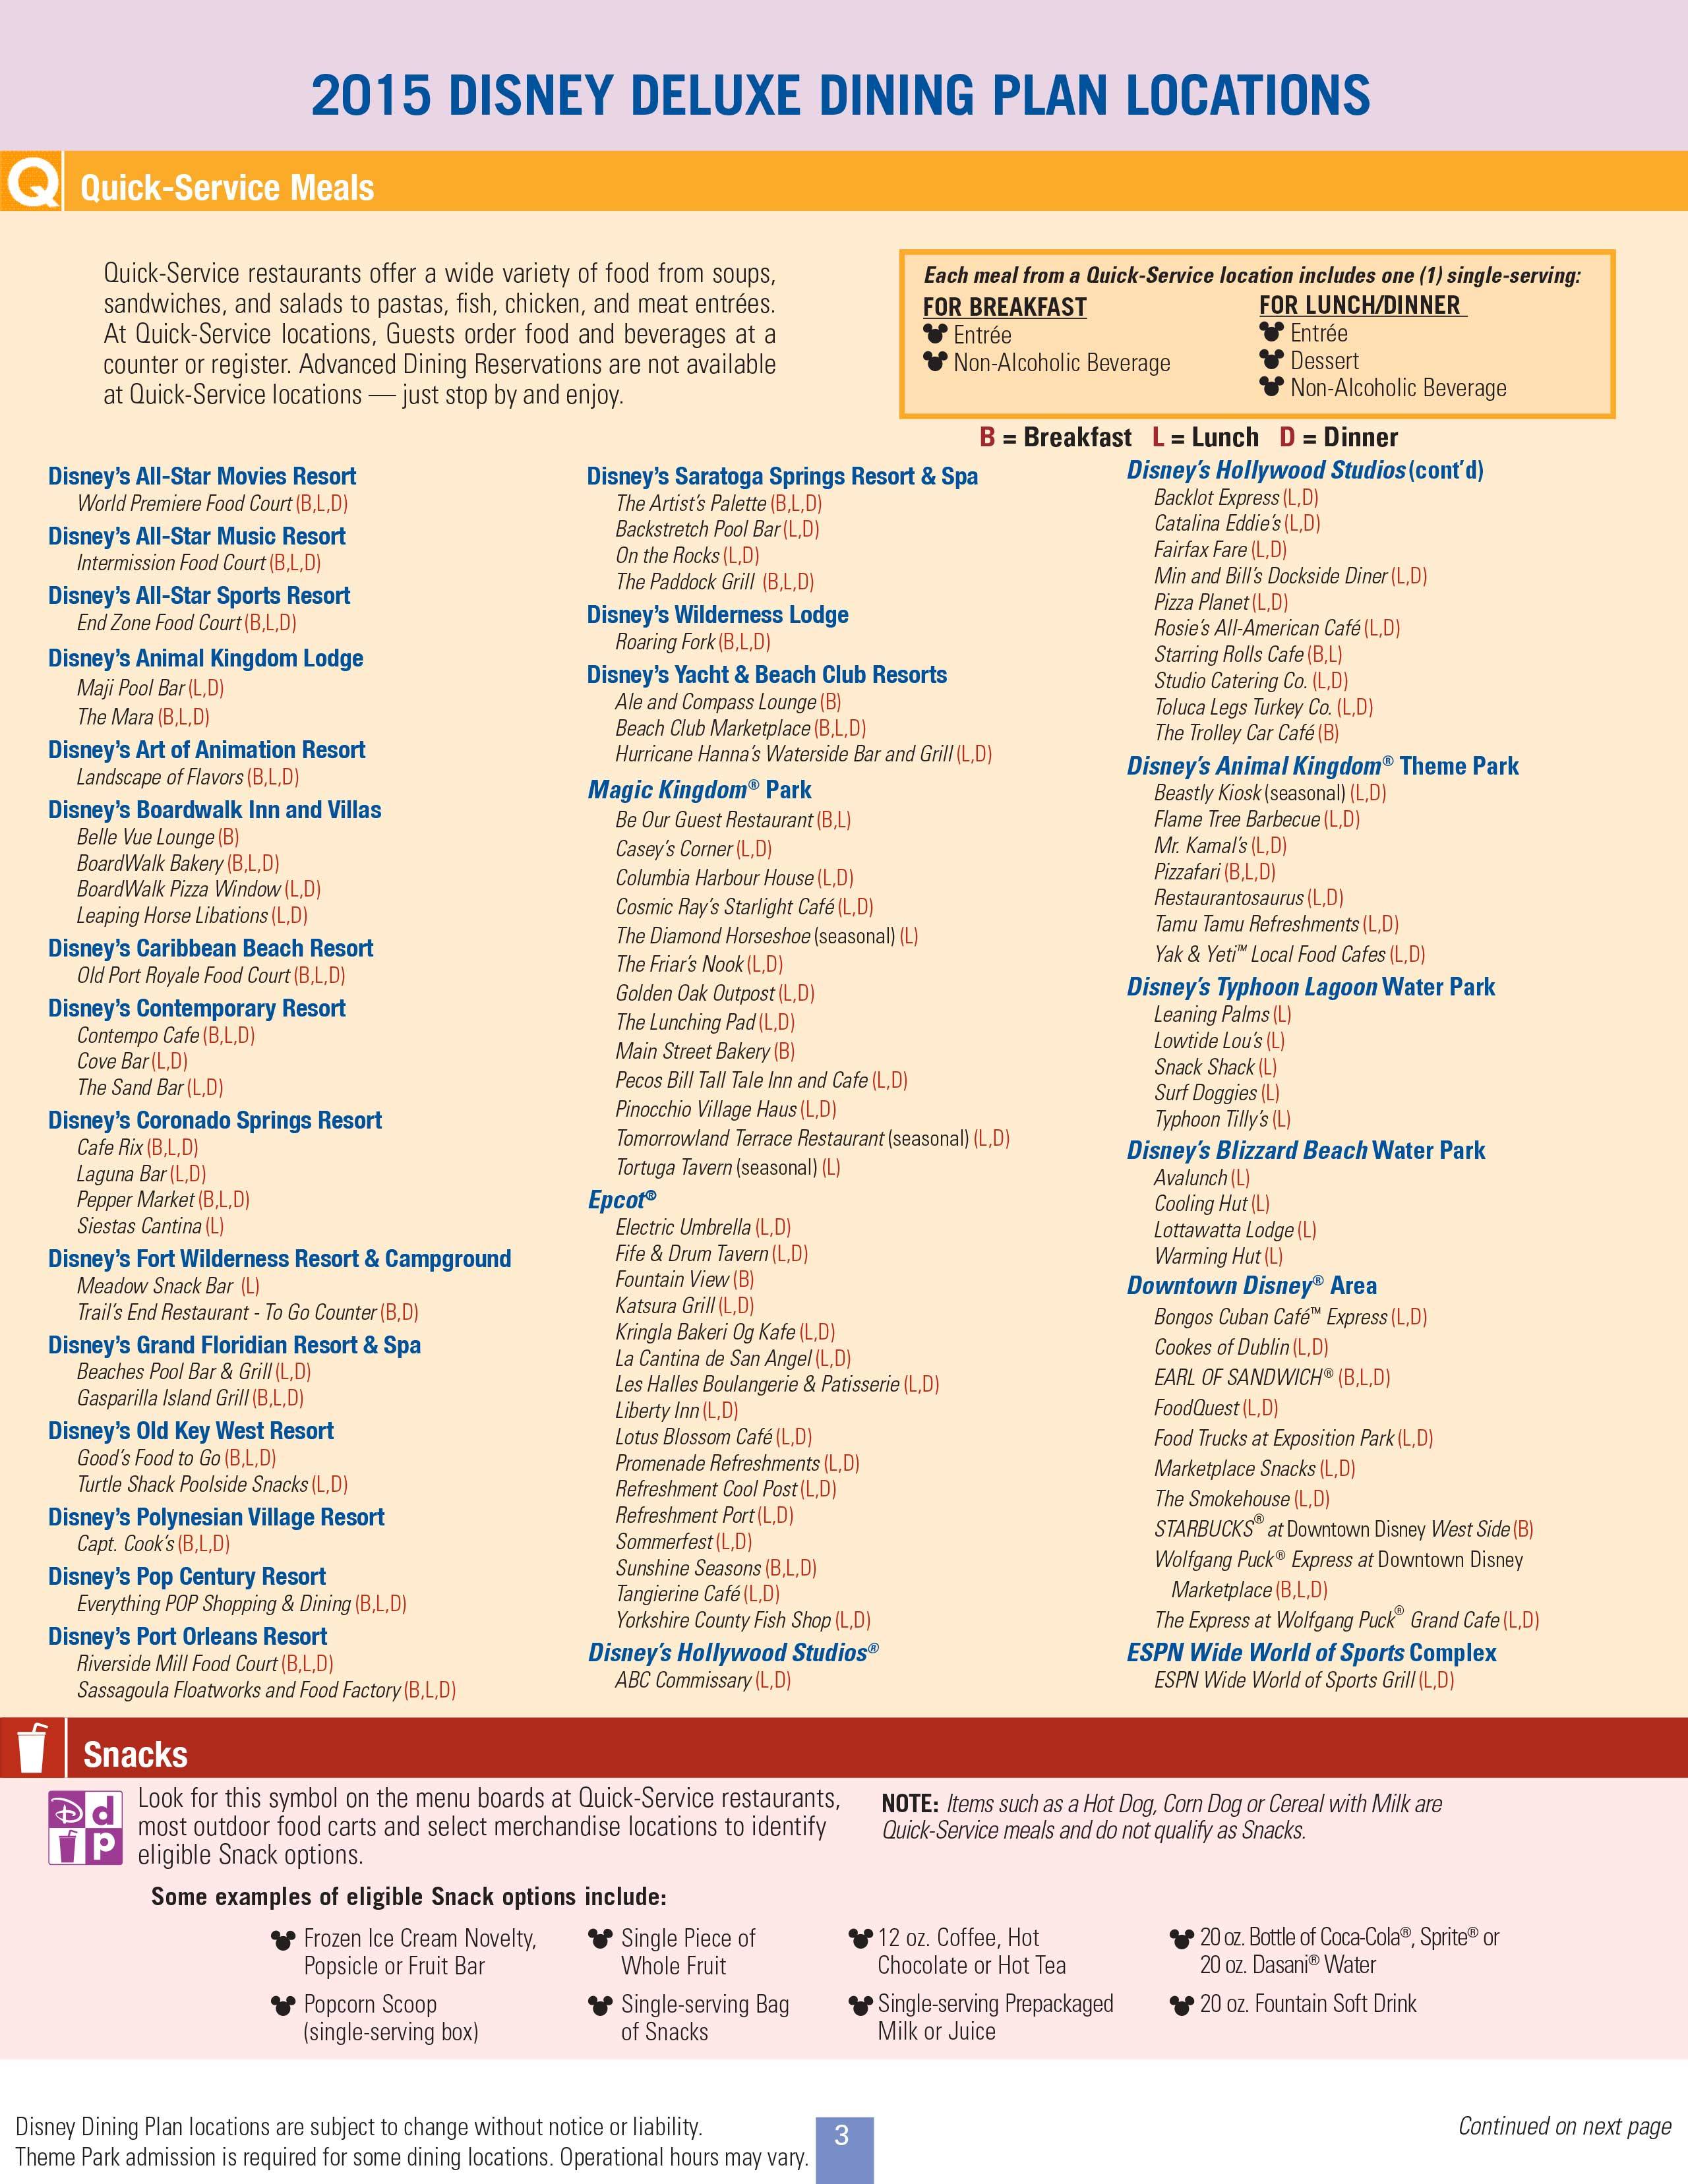 2015 Disney Deluxe Dining Plan brochure - Page 3